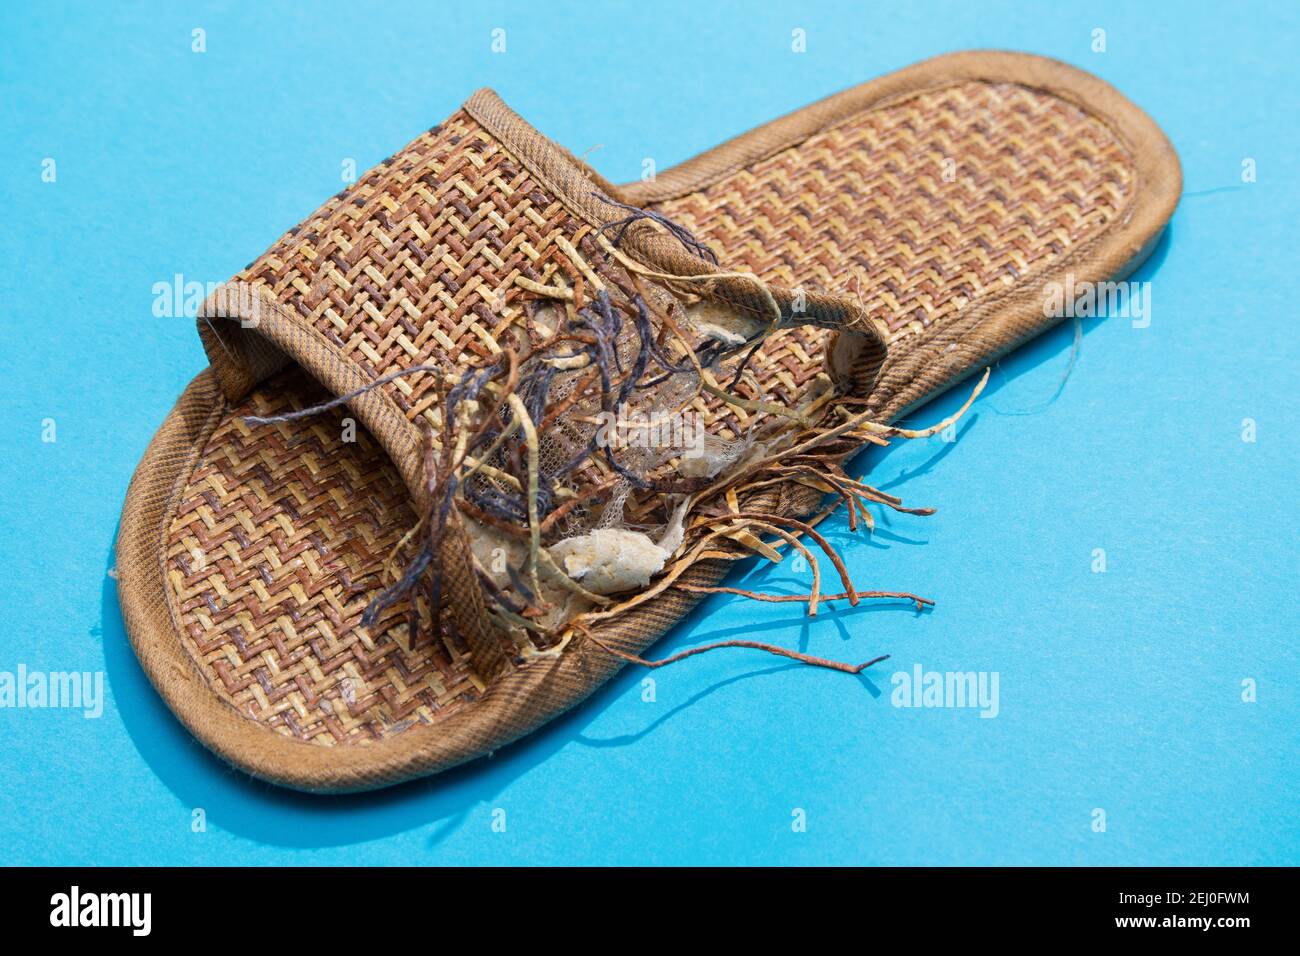 One of the problems that awaits you if you have a puppy is gnawed slippers. Tattered bamboo slipper Stock Photo